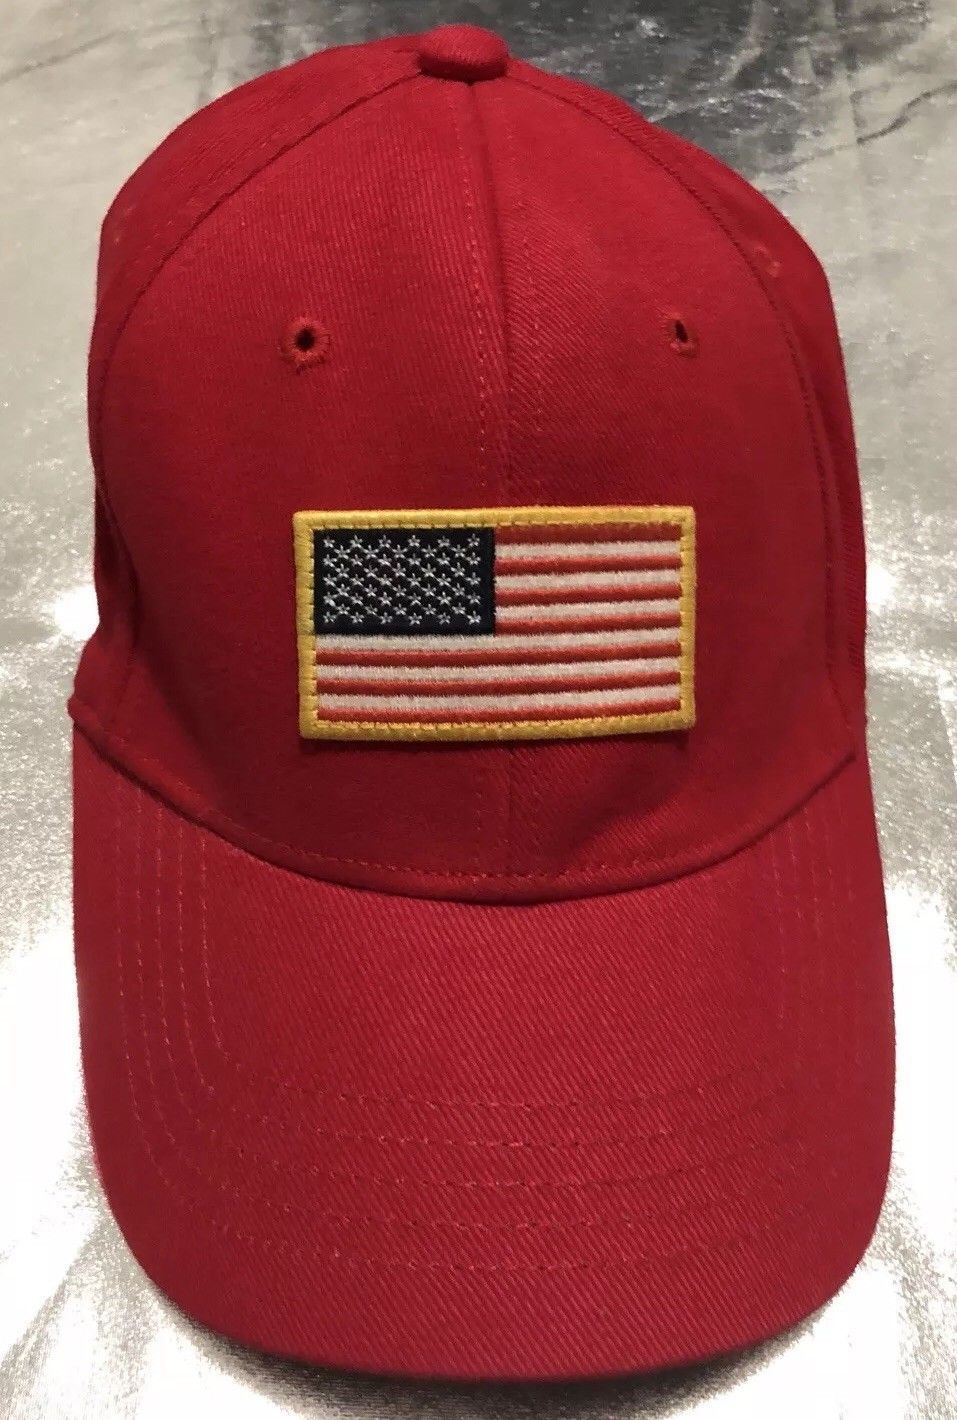 American Eagle Outfitters Men’s Cap Hat Size L/XL Red With USA Logo - Hats